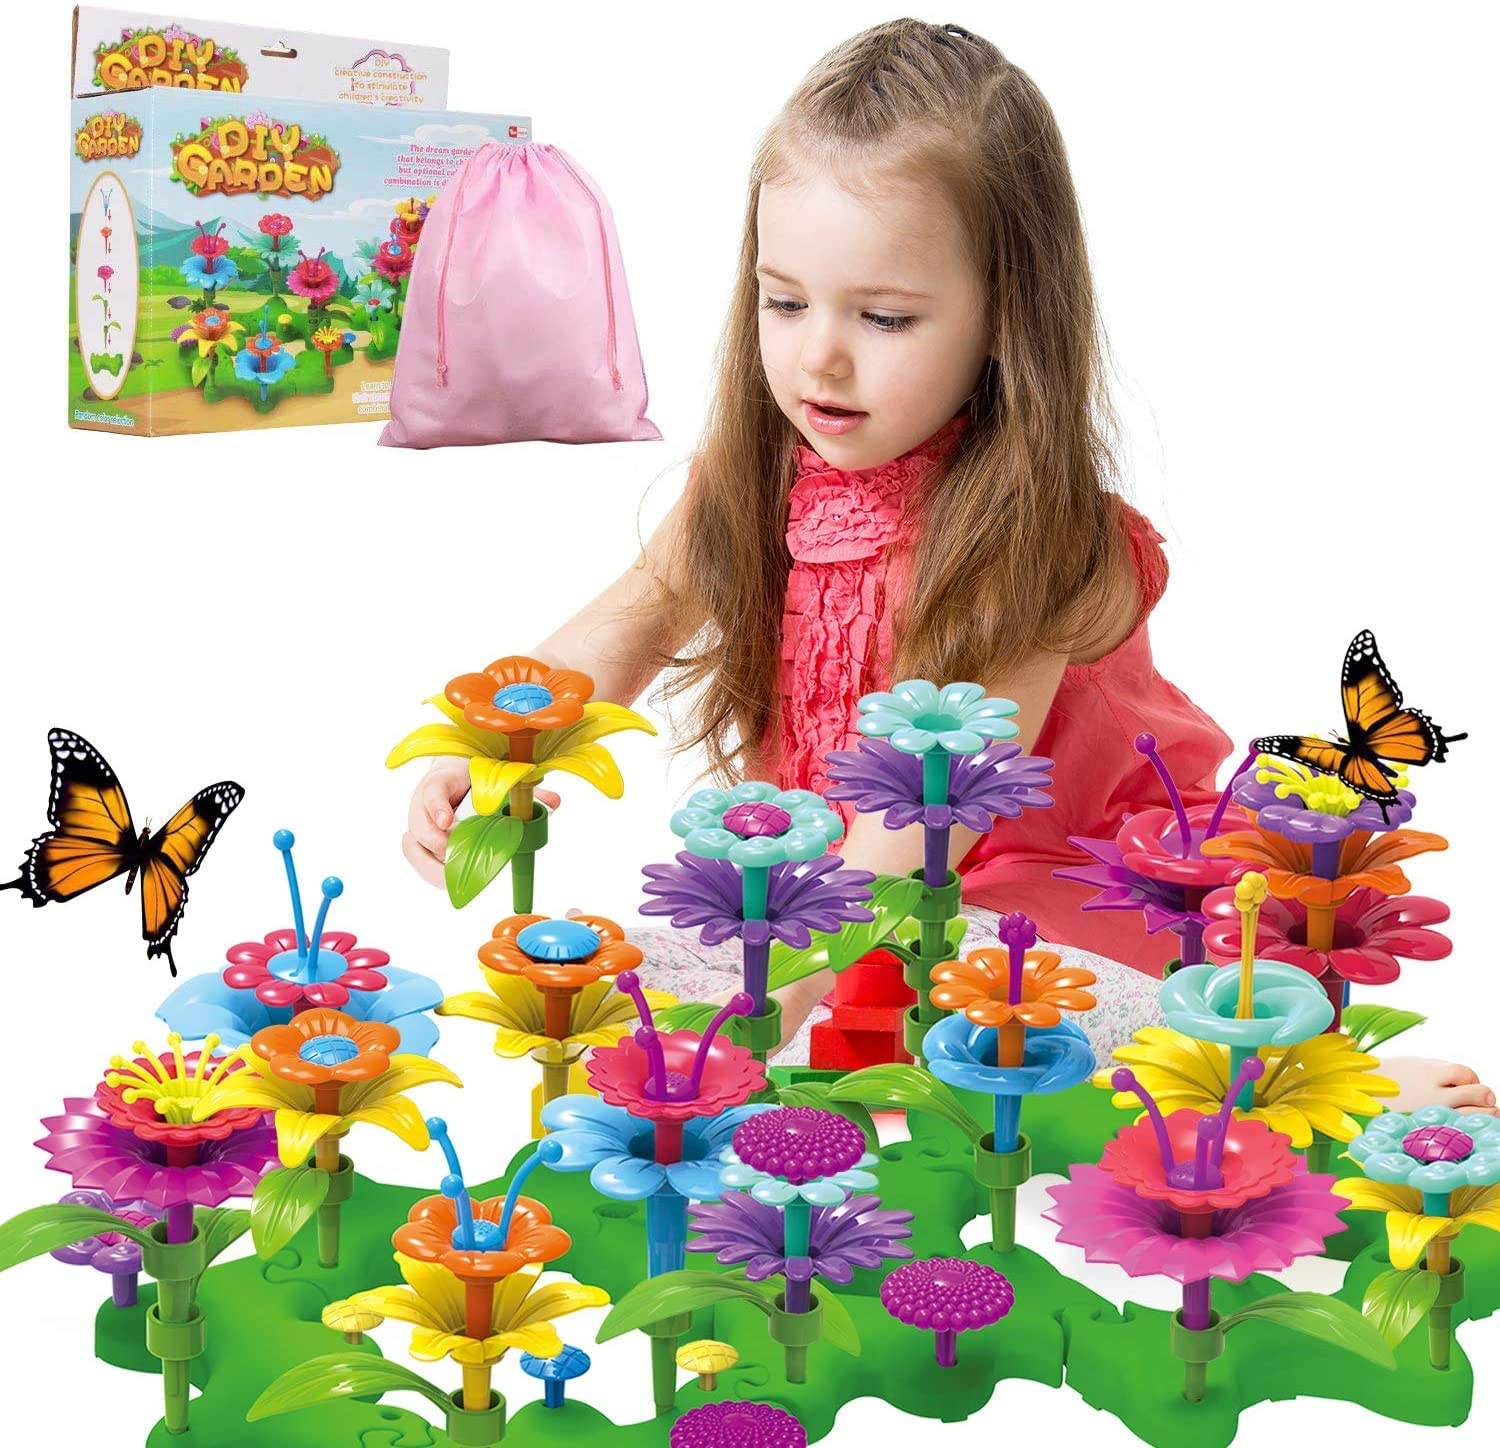 STEM Crafts and Build a Garden with Insects and Animals PREBOX Flower Building Toys Set for Toddler Girls Birthday Gifts and Fine Motor Skills Toys for Kids Age 3 4 5 6 yr 